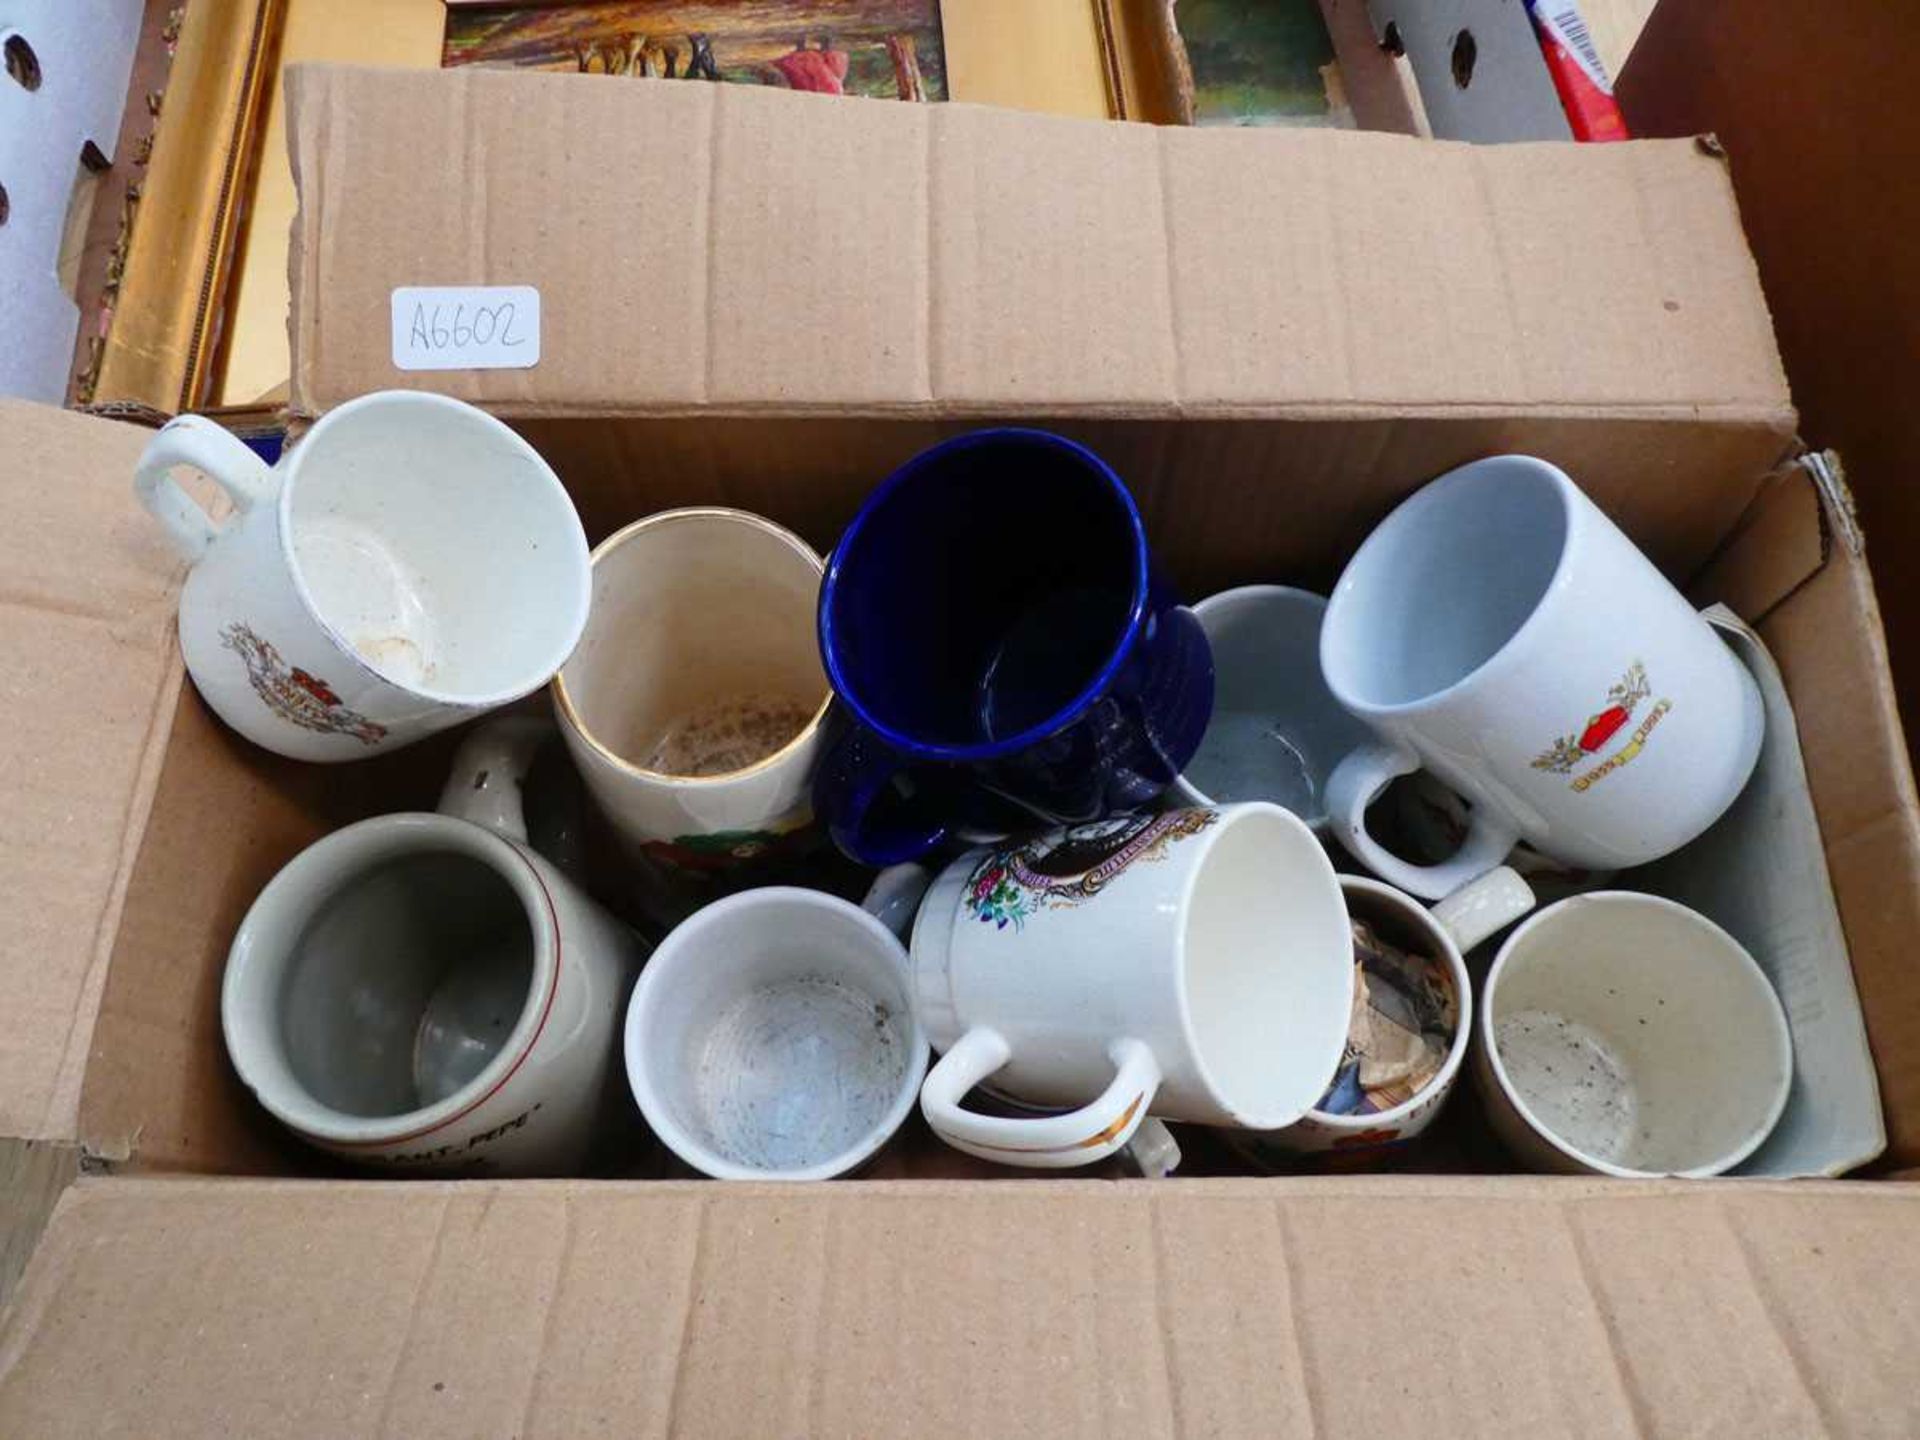 Box containing commemorative and other coffee mugs